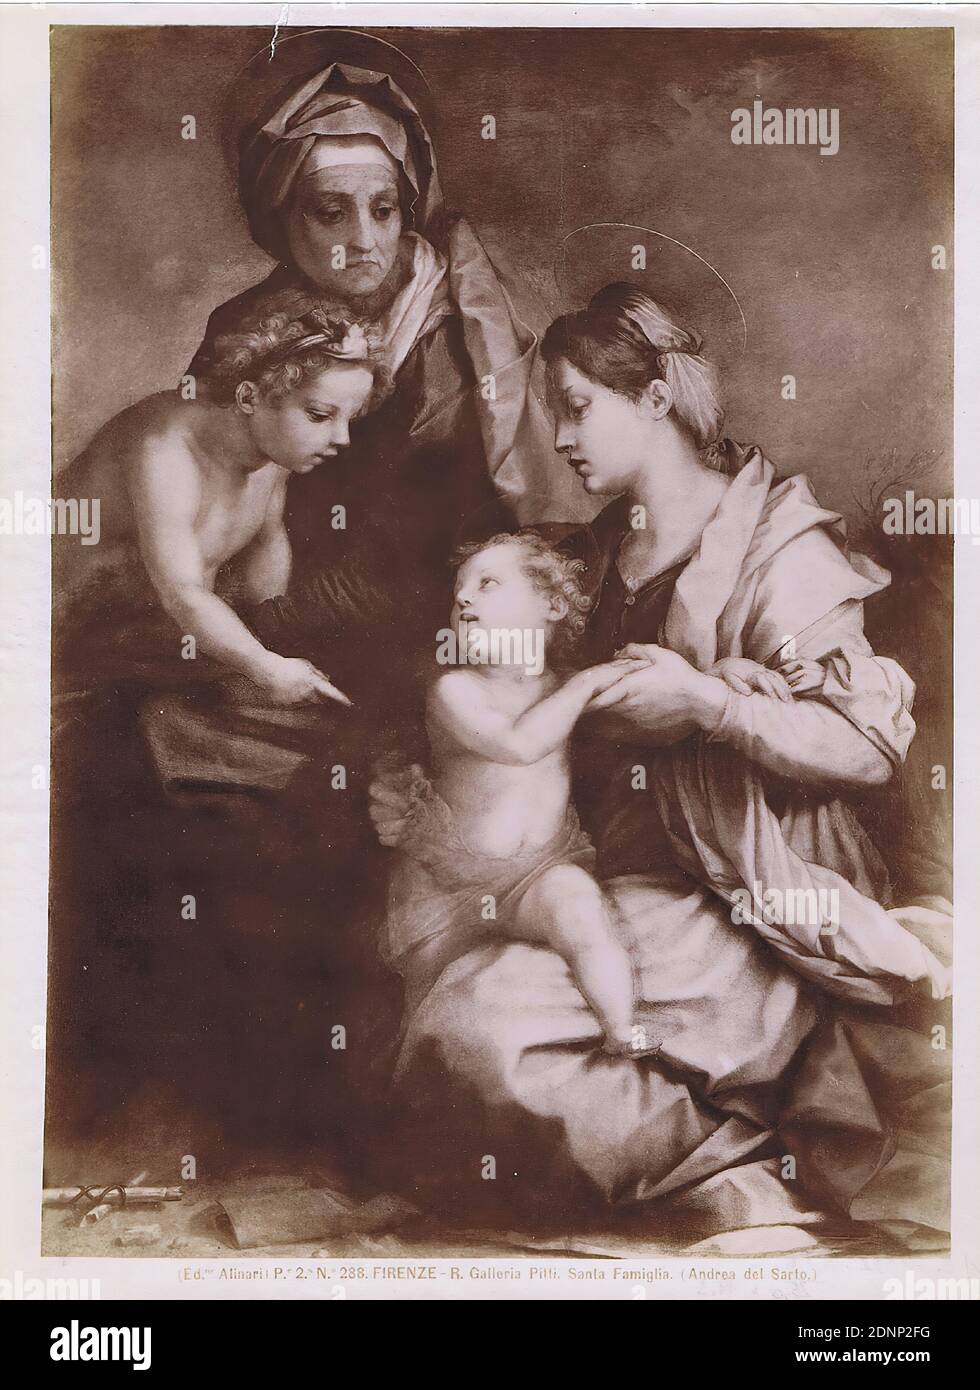 Andrea del Sarto: Holy Family (Sacra Famiglia Medici). Galleria Palatina, Palzzo Pitti, Florence, albumin paper, black and white positive process, image size: height: 25.00 cm; width: 19.30 cm, FIRENZE - Galleria Pitti. Santa Famiglia (Andrea del Sarto.) Verso round stamp, painting, Mary with Christ Child (Madonna), Elizabeth, John the Baptist (life and deeds Stock Photo